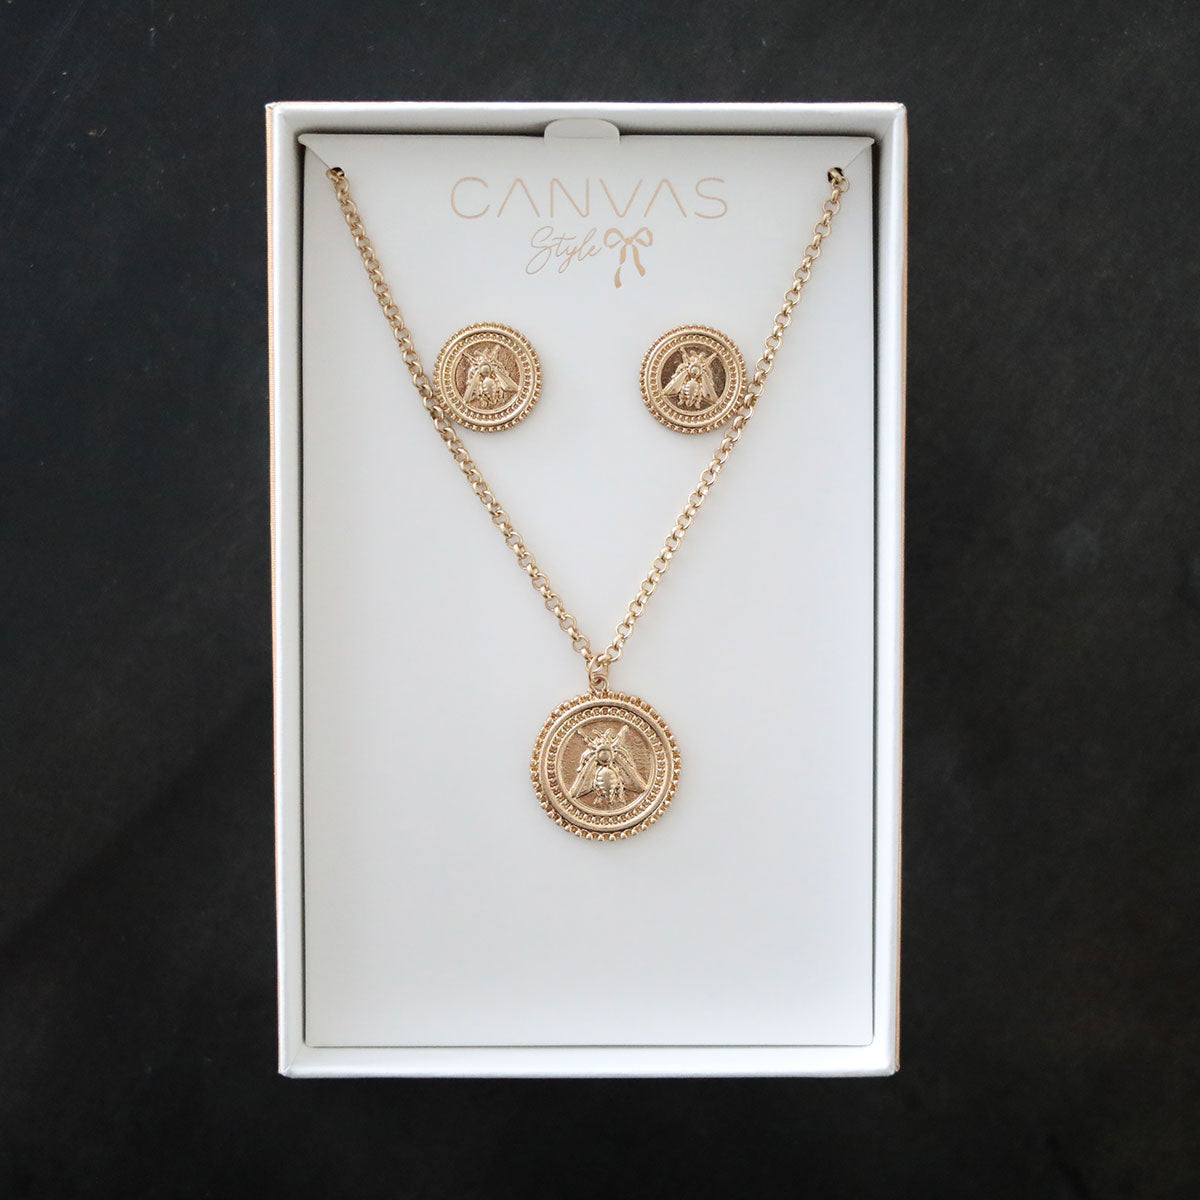 Lizette Bee Medallion Earring and Necklace Set in Worn Gold by CANVAS